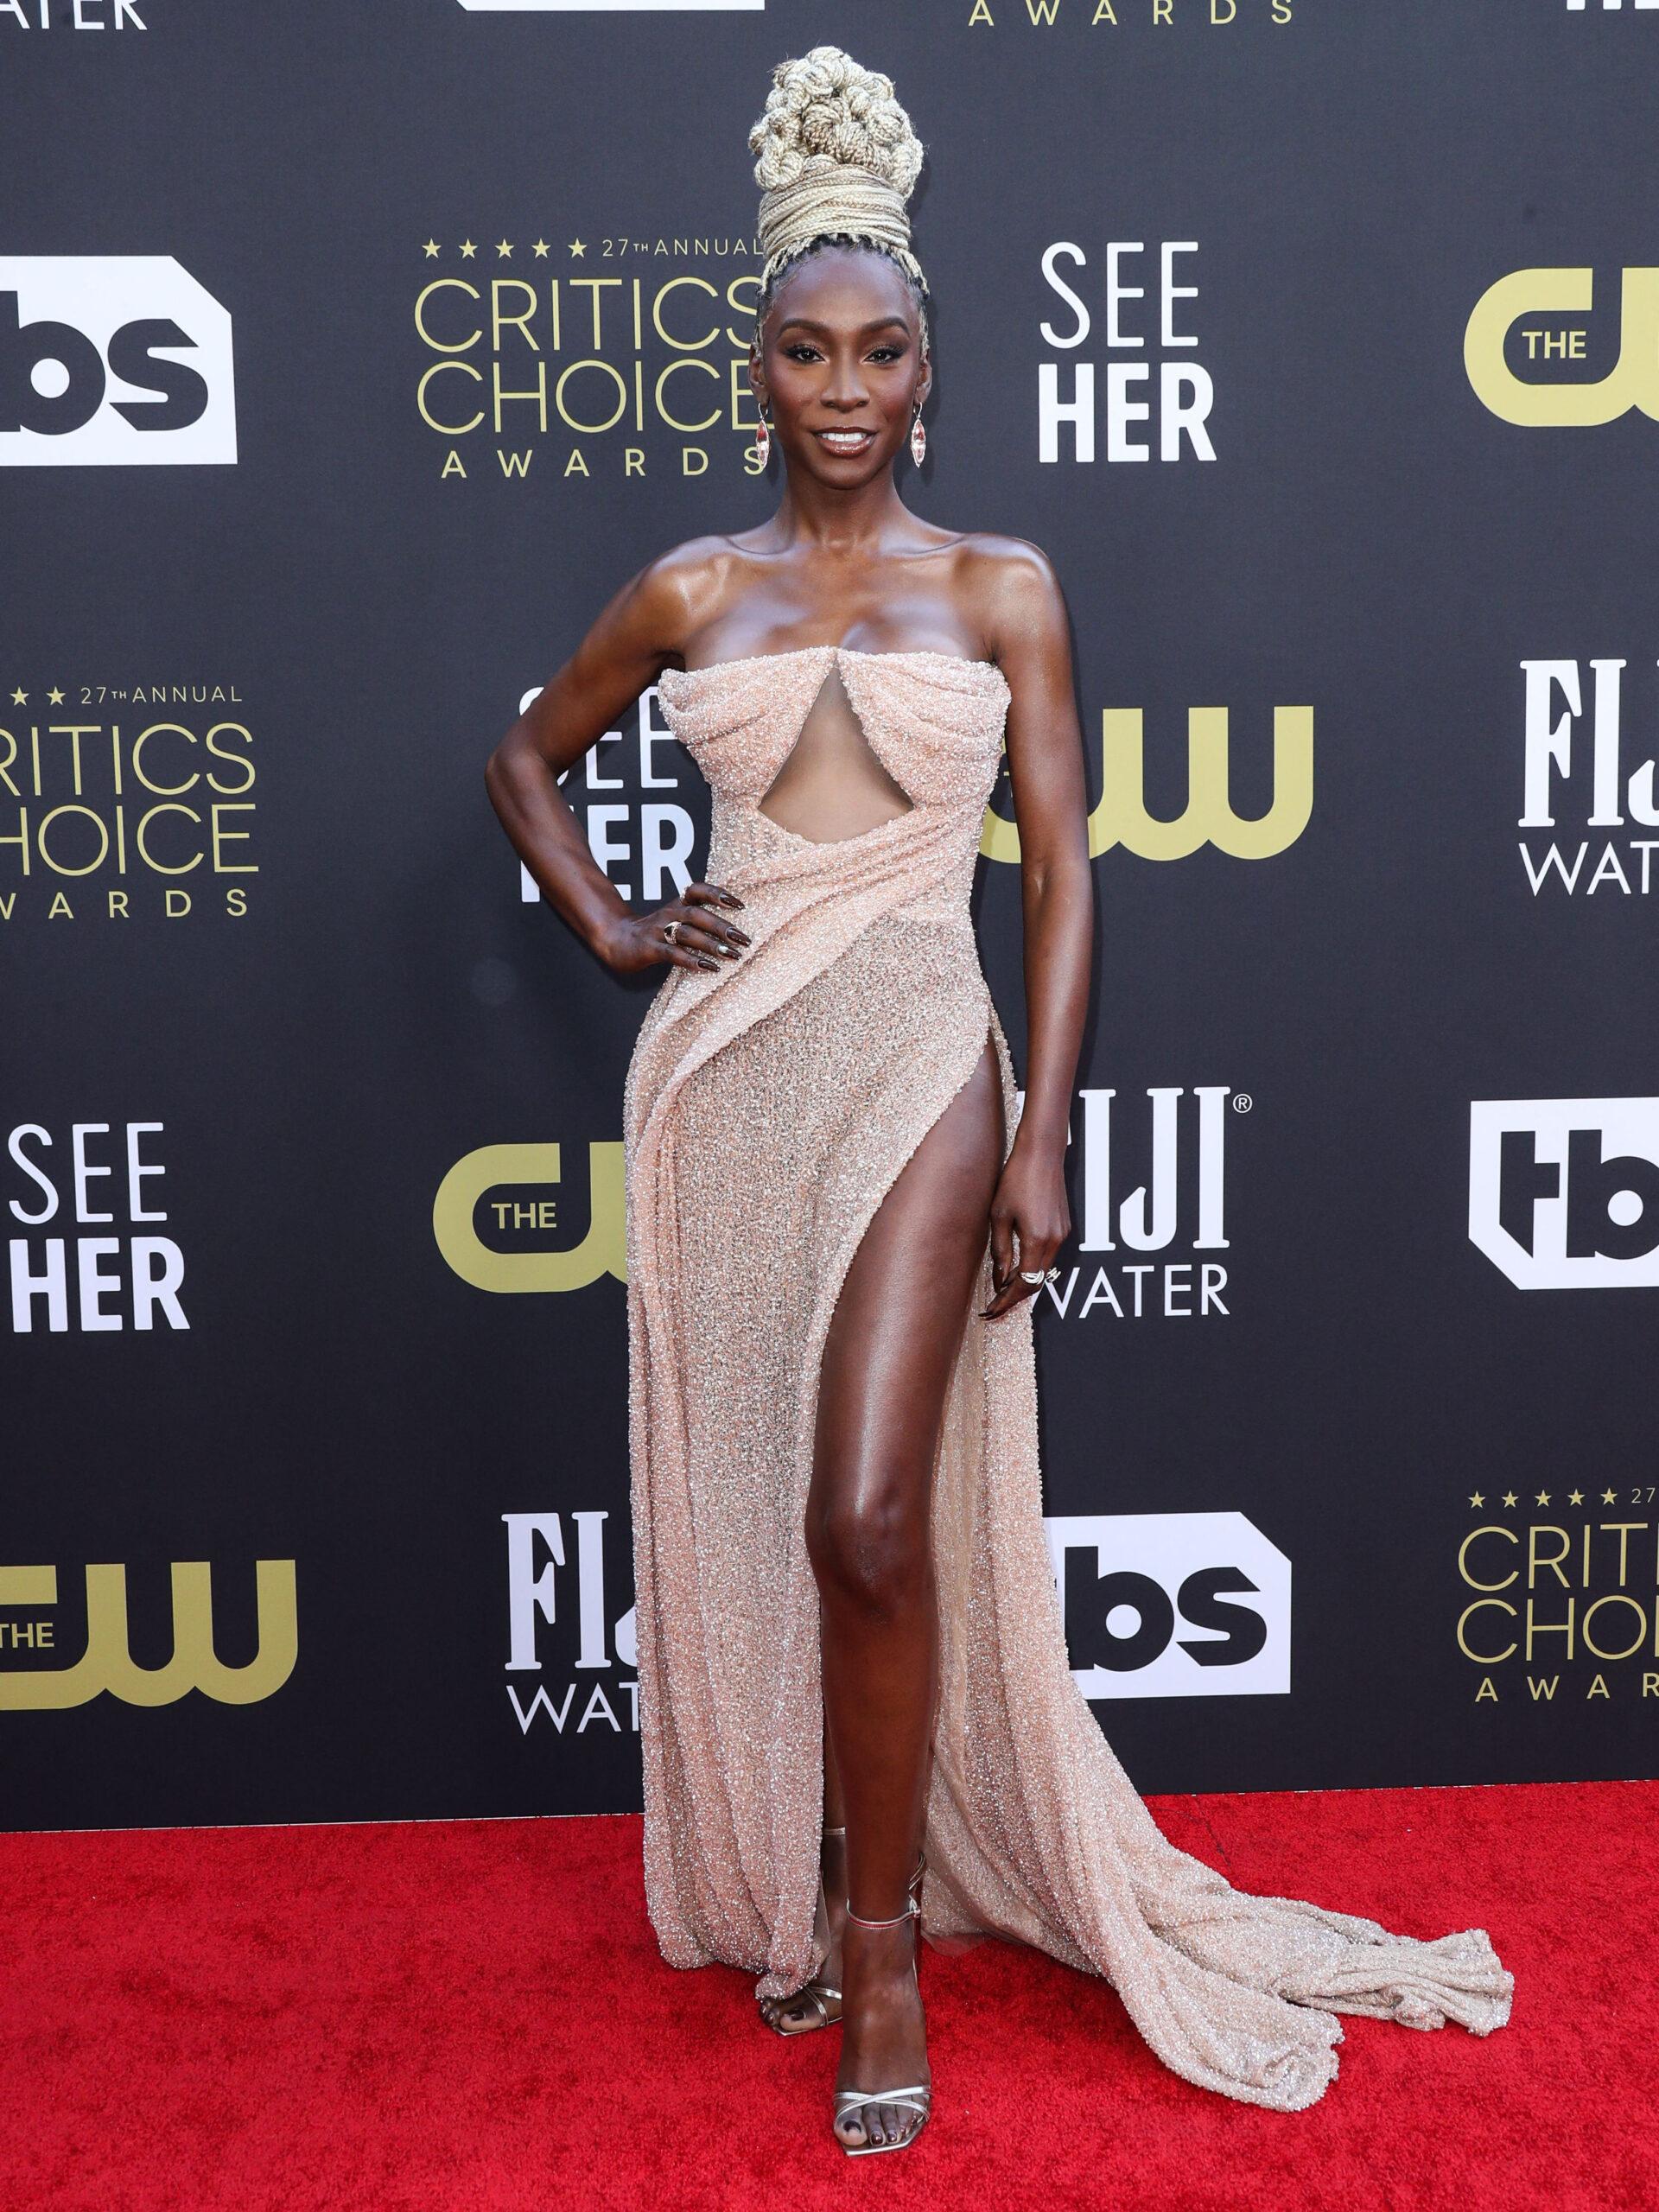 Emma Roberts Apologizes For Being Transphobic Towards 'AHS' Co-Star Angelica Ross